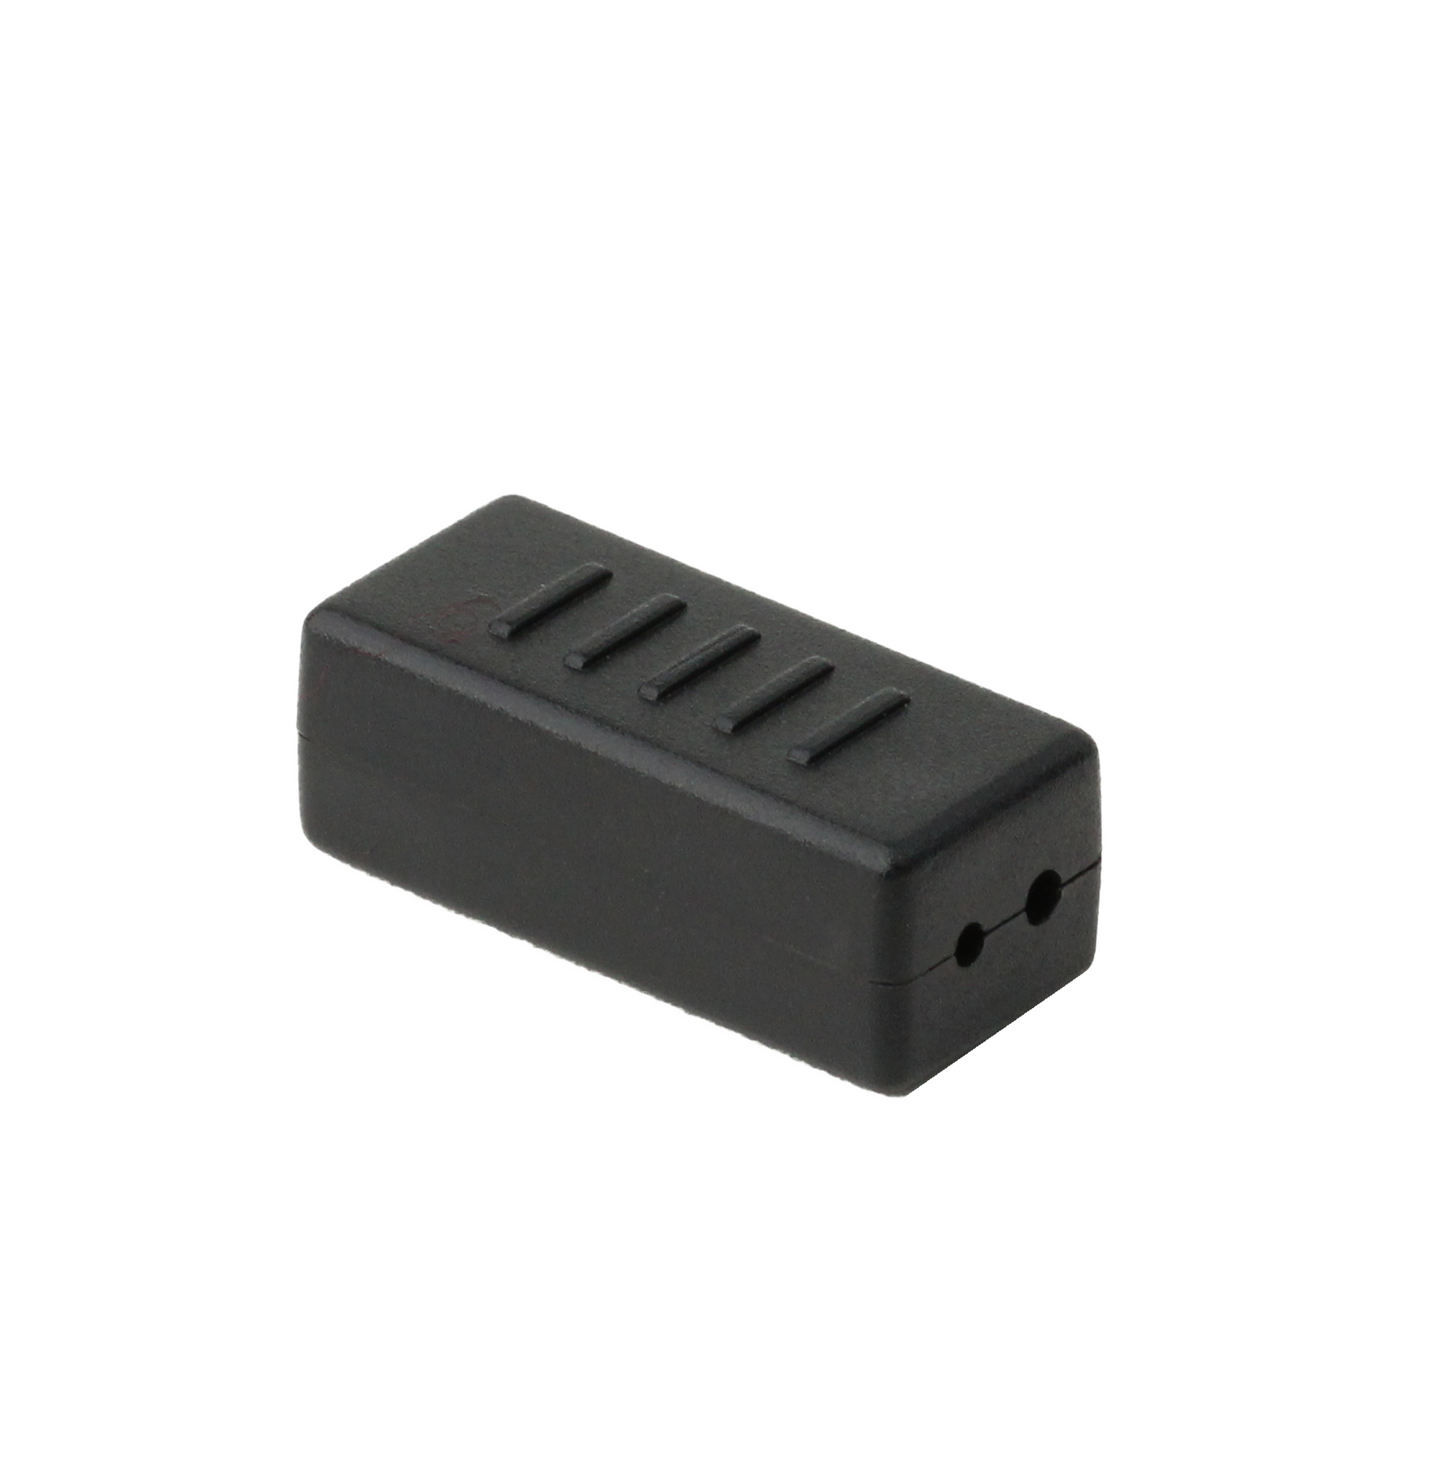 Adaptor for use with acoustic tube earpieces